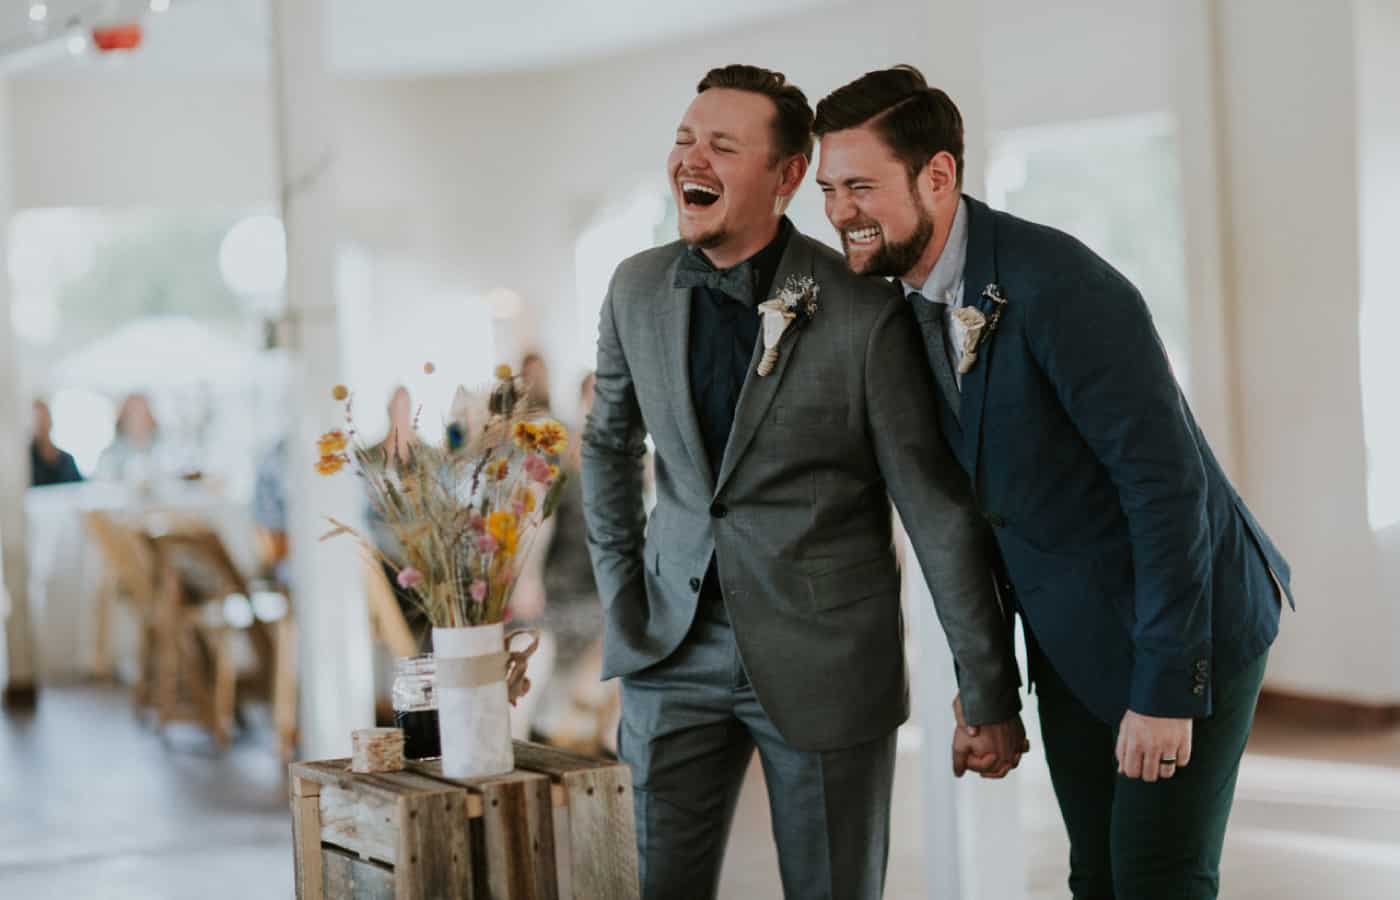 Two brooms laugh during the toasts at their wedding